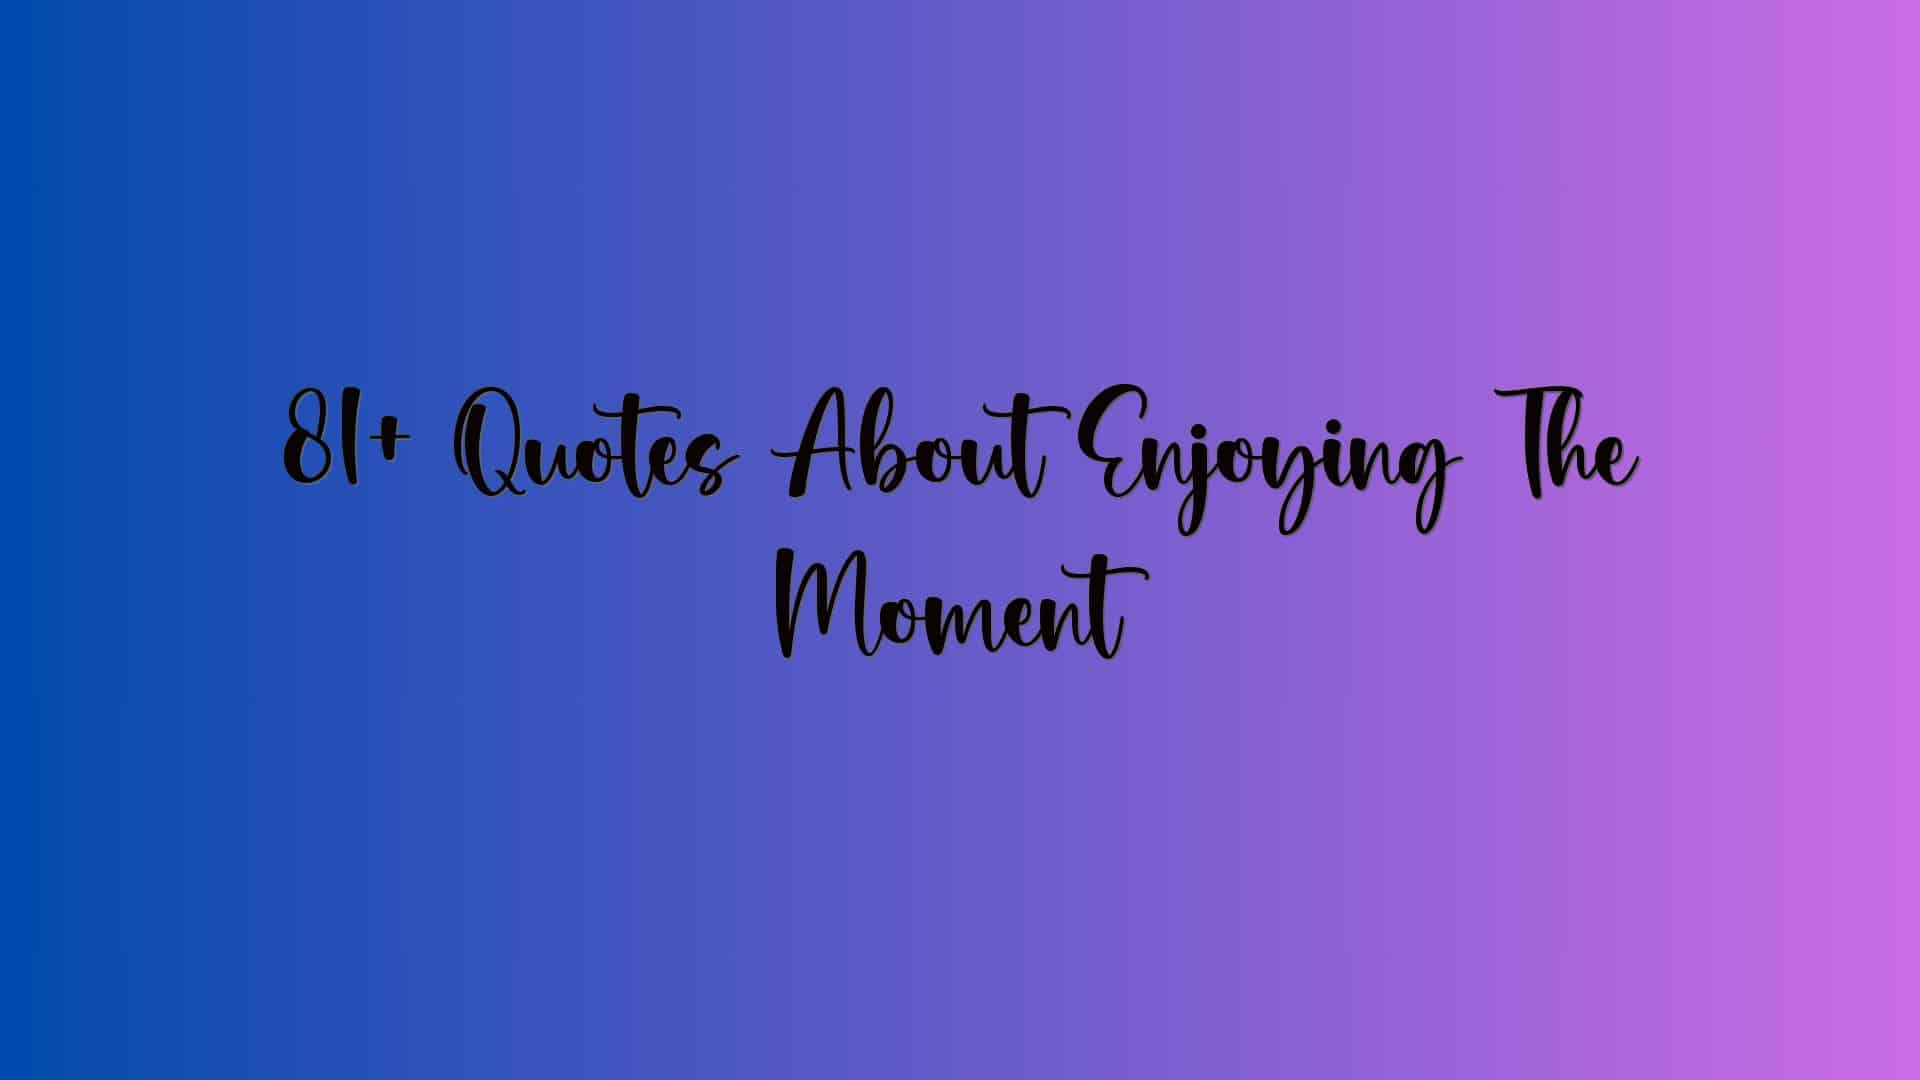 81+ Quotes About Enjoying The Moment